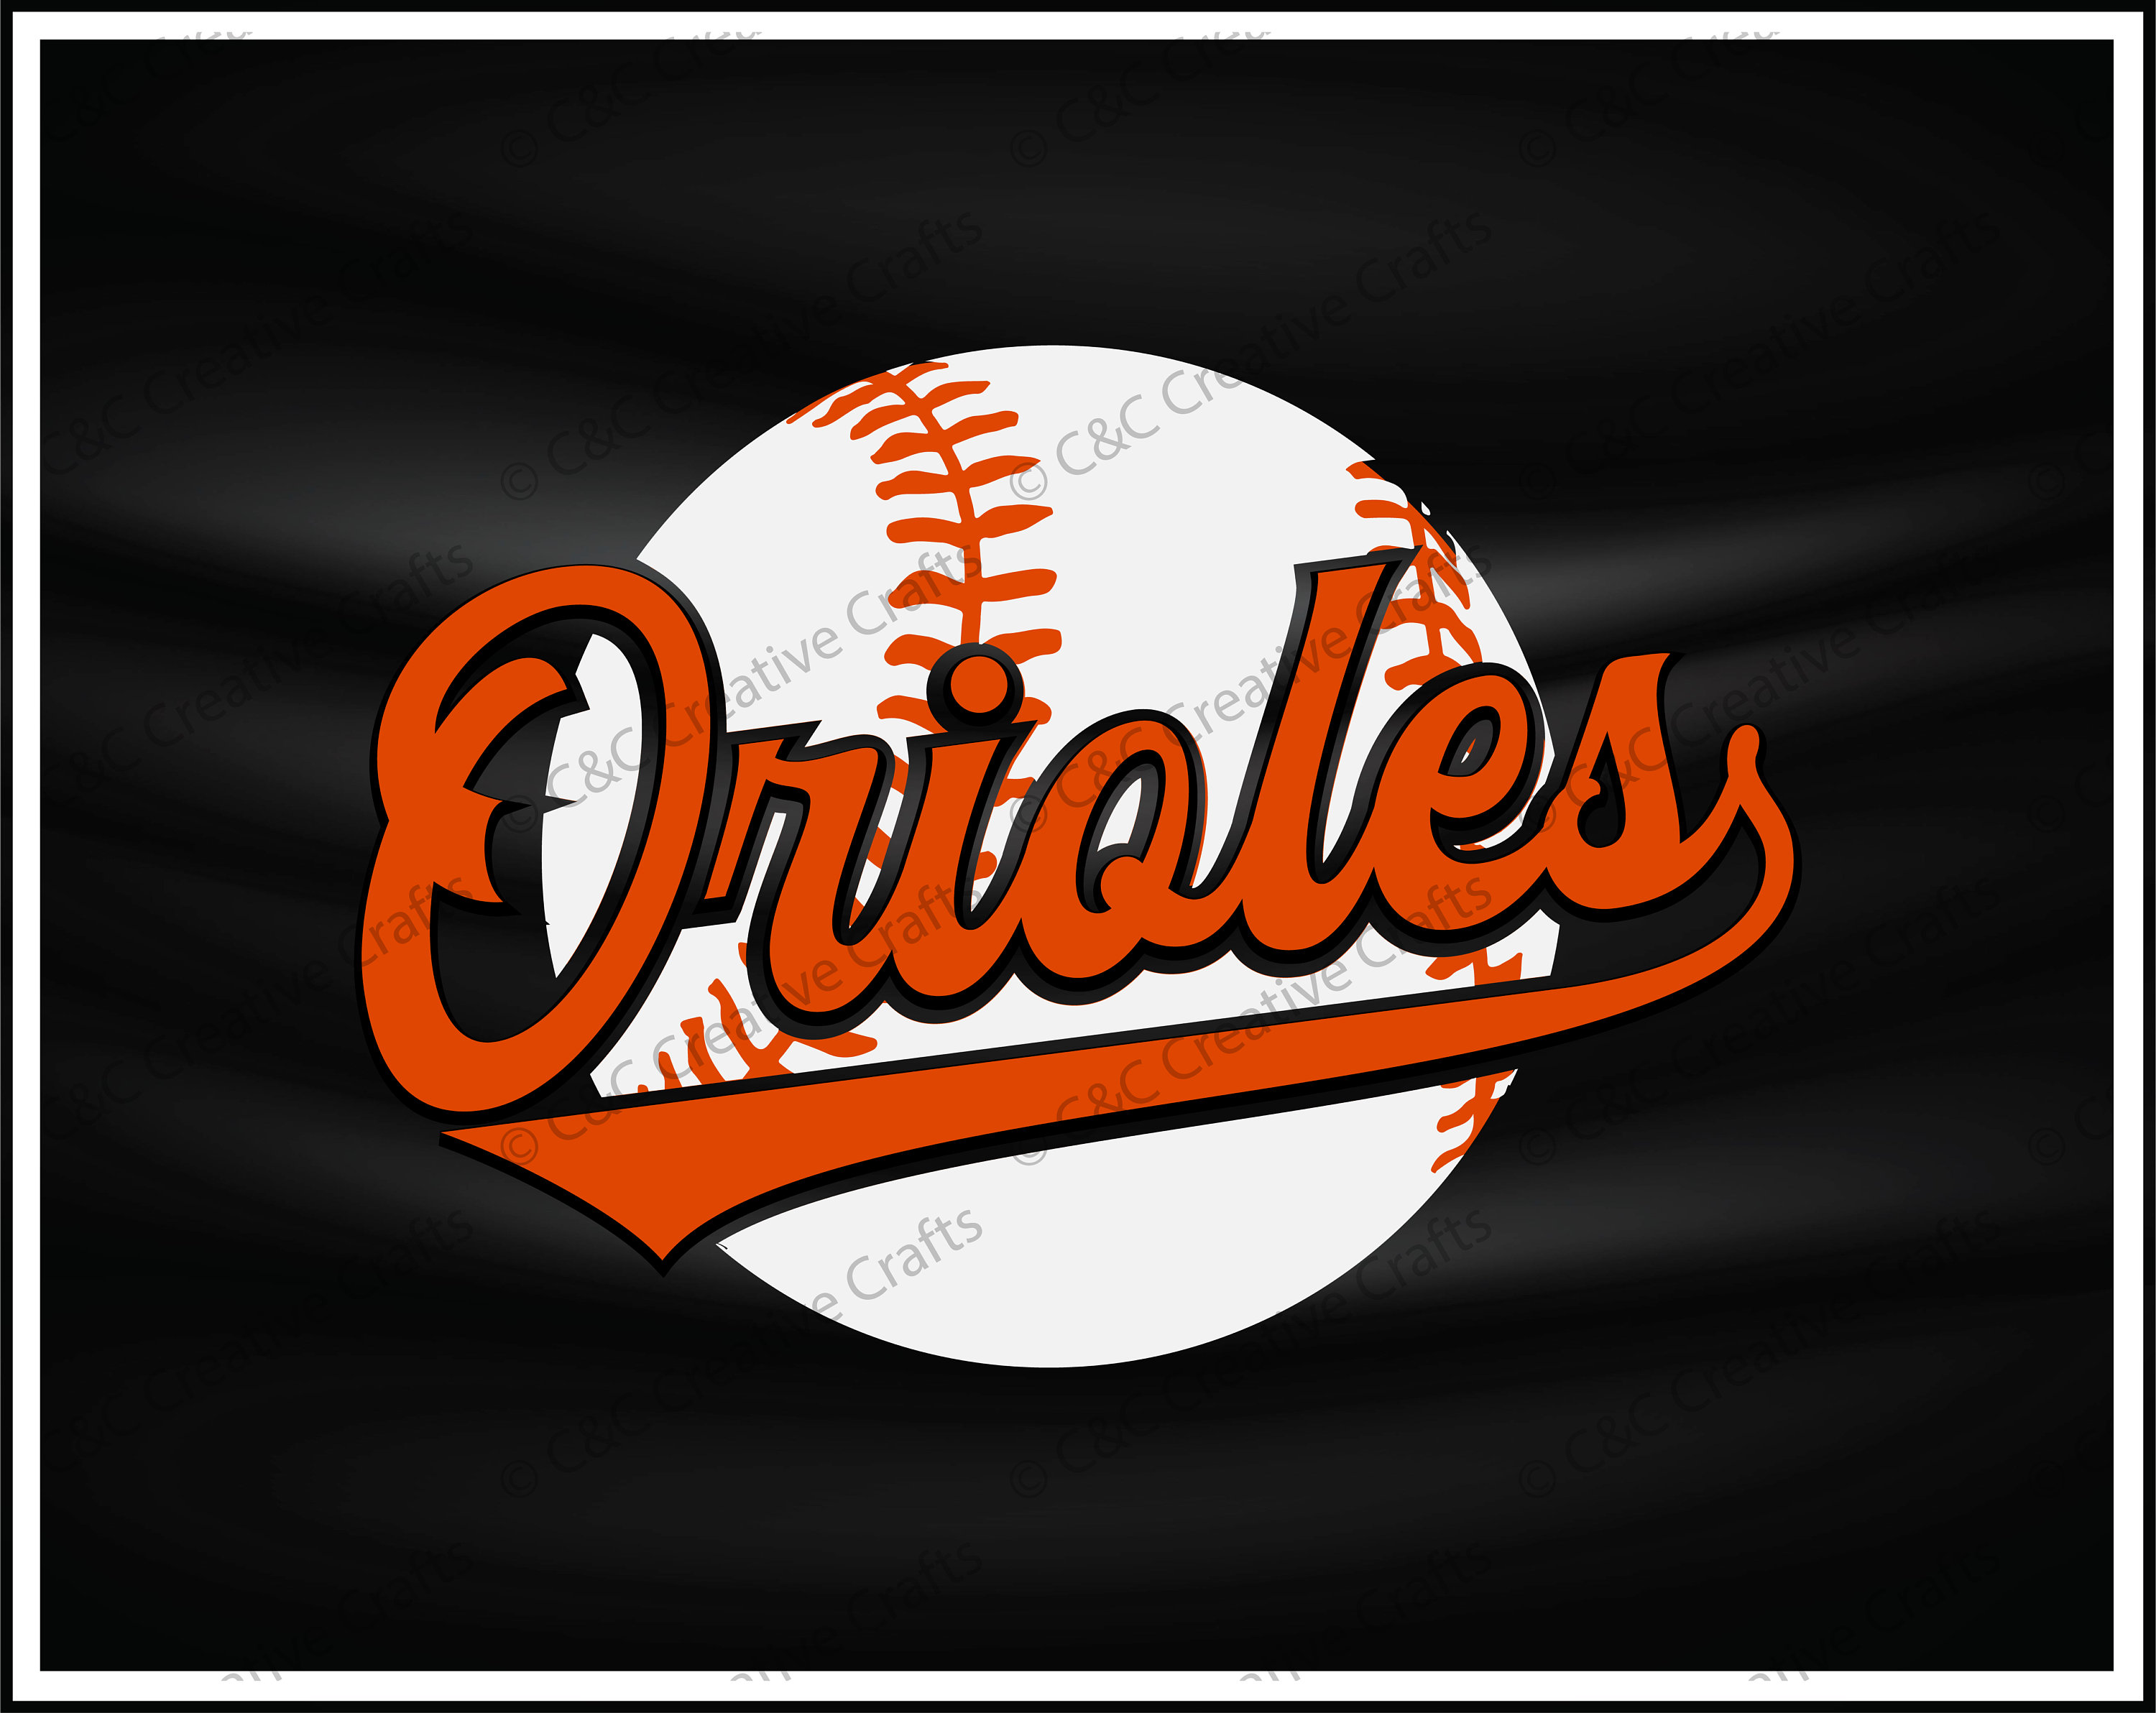 Major League Baseball Sport Sticker by Baltimore Orioles for iOS & Android